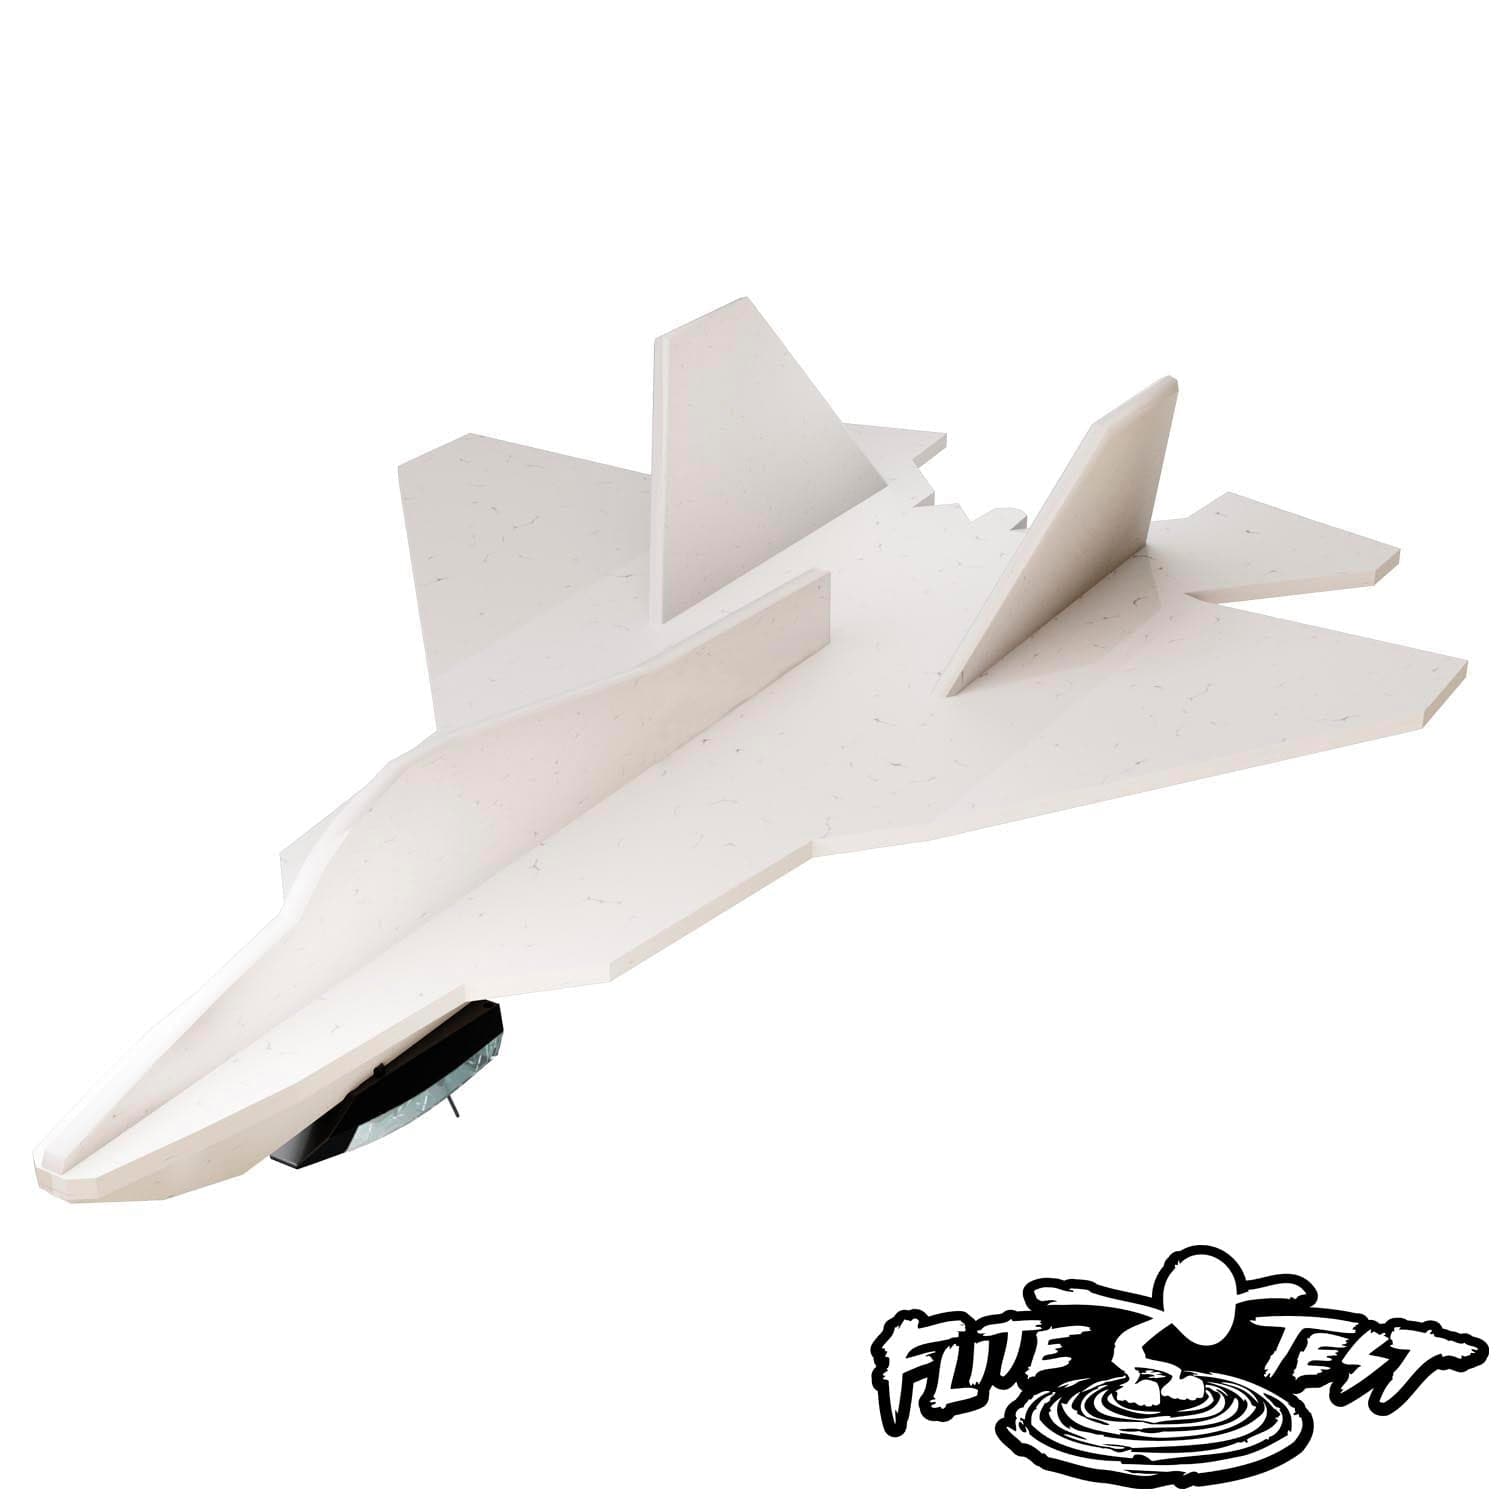 F22 RAPTOR® ADD-ON FOR POWERUP 4.0